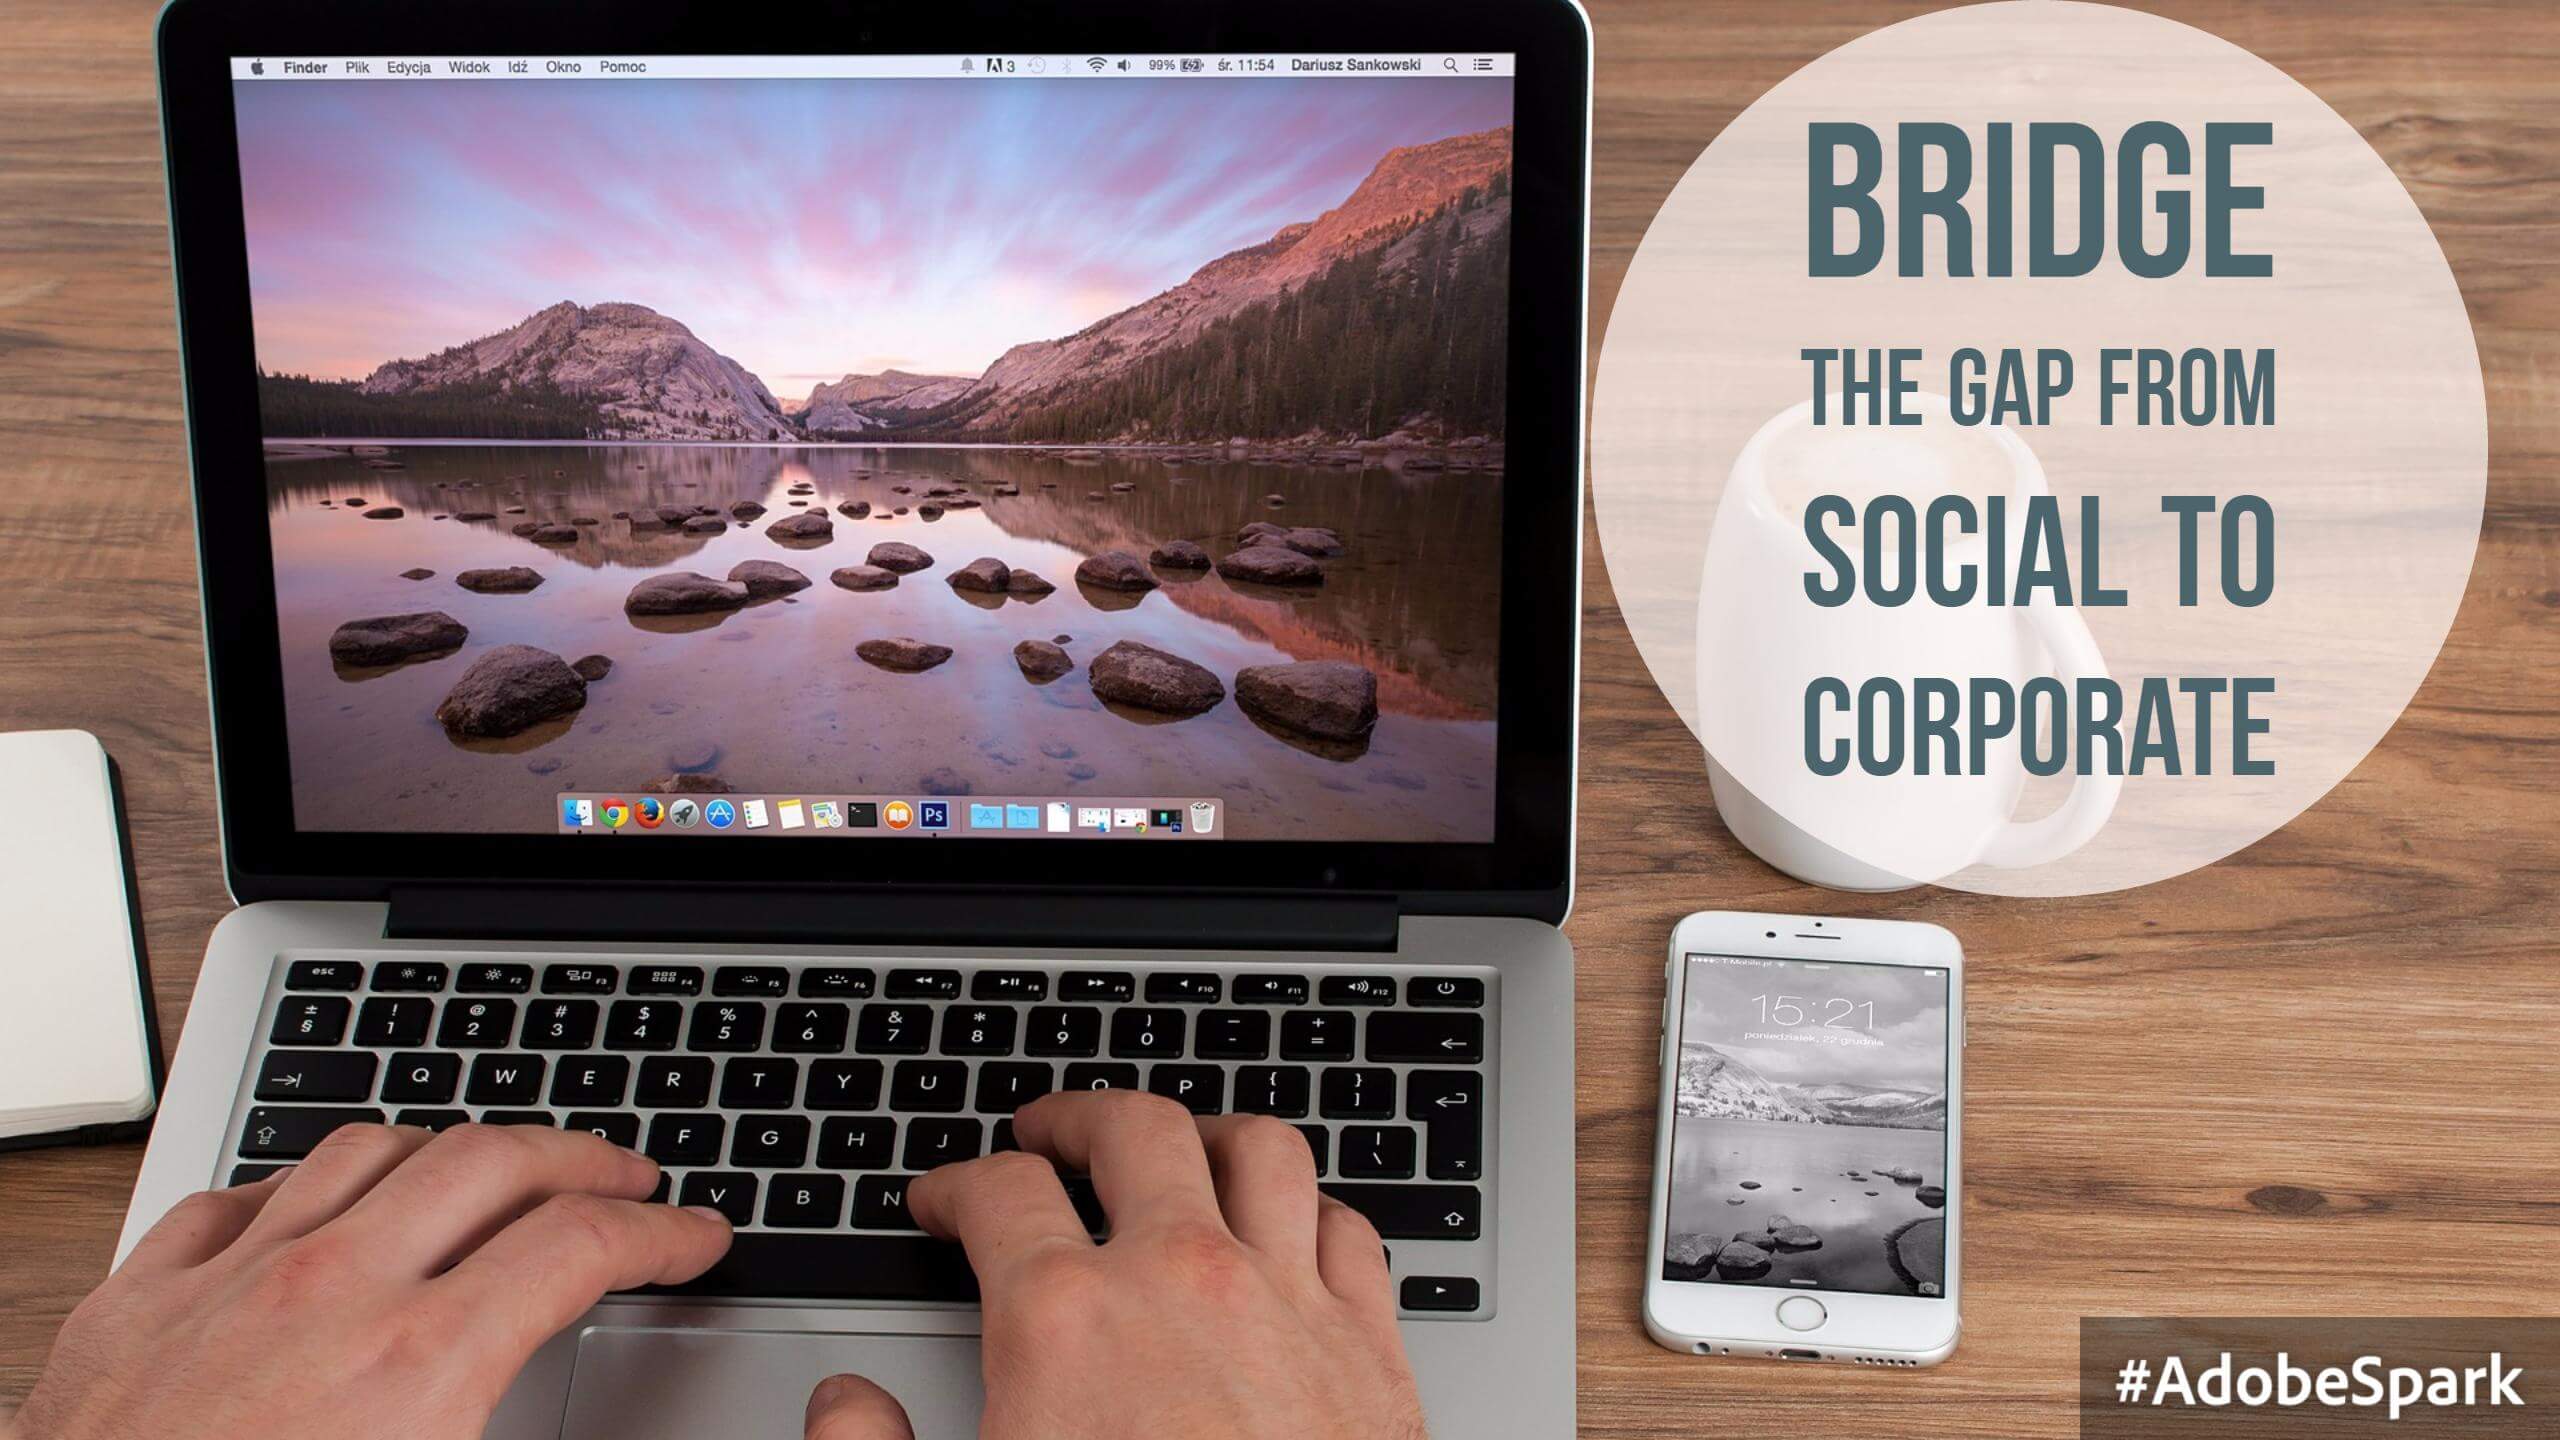 Bridging the Gap from Social to Corporate